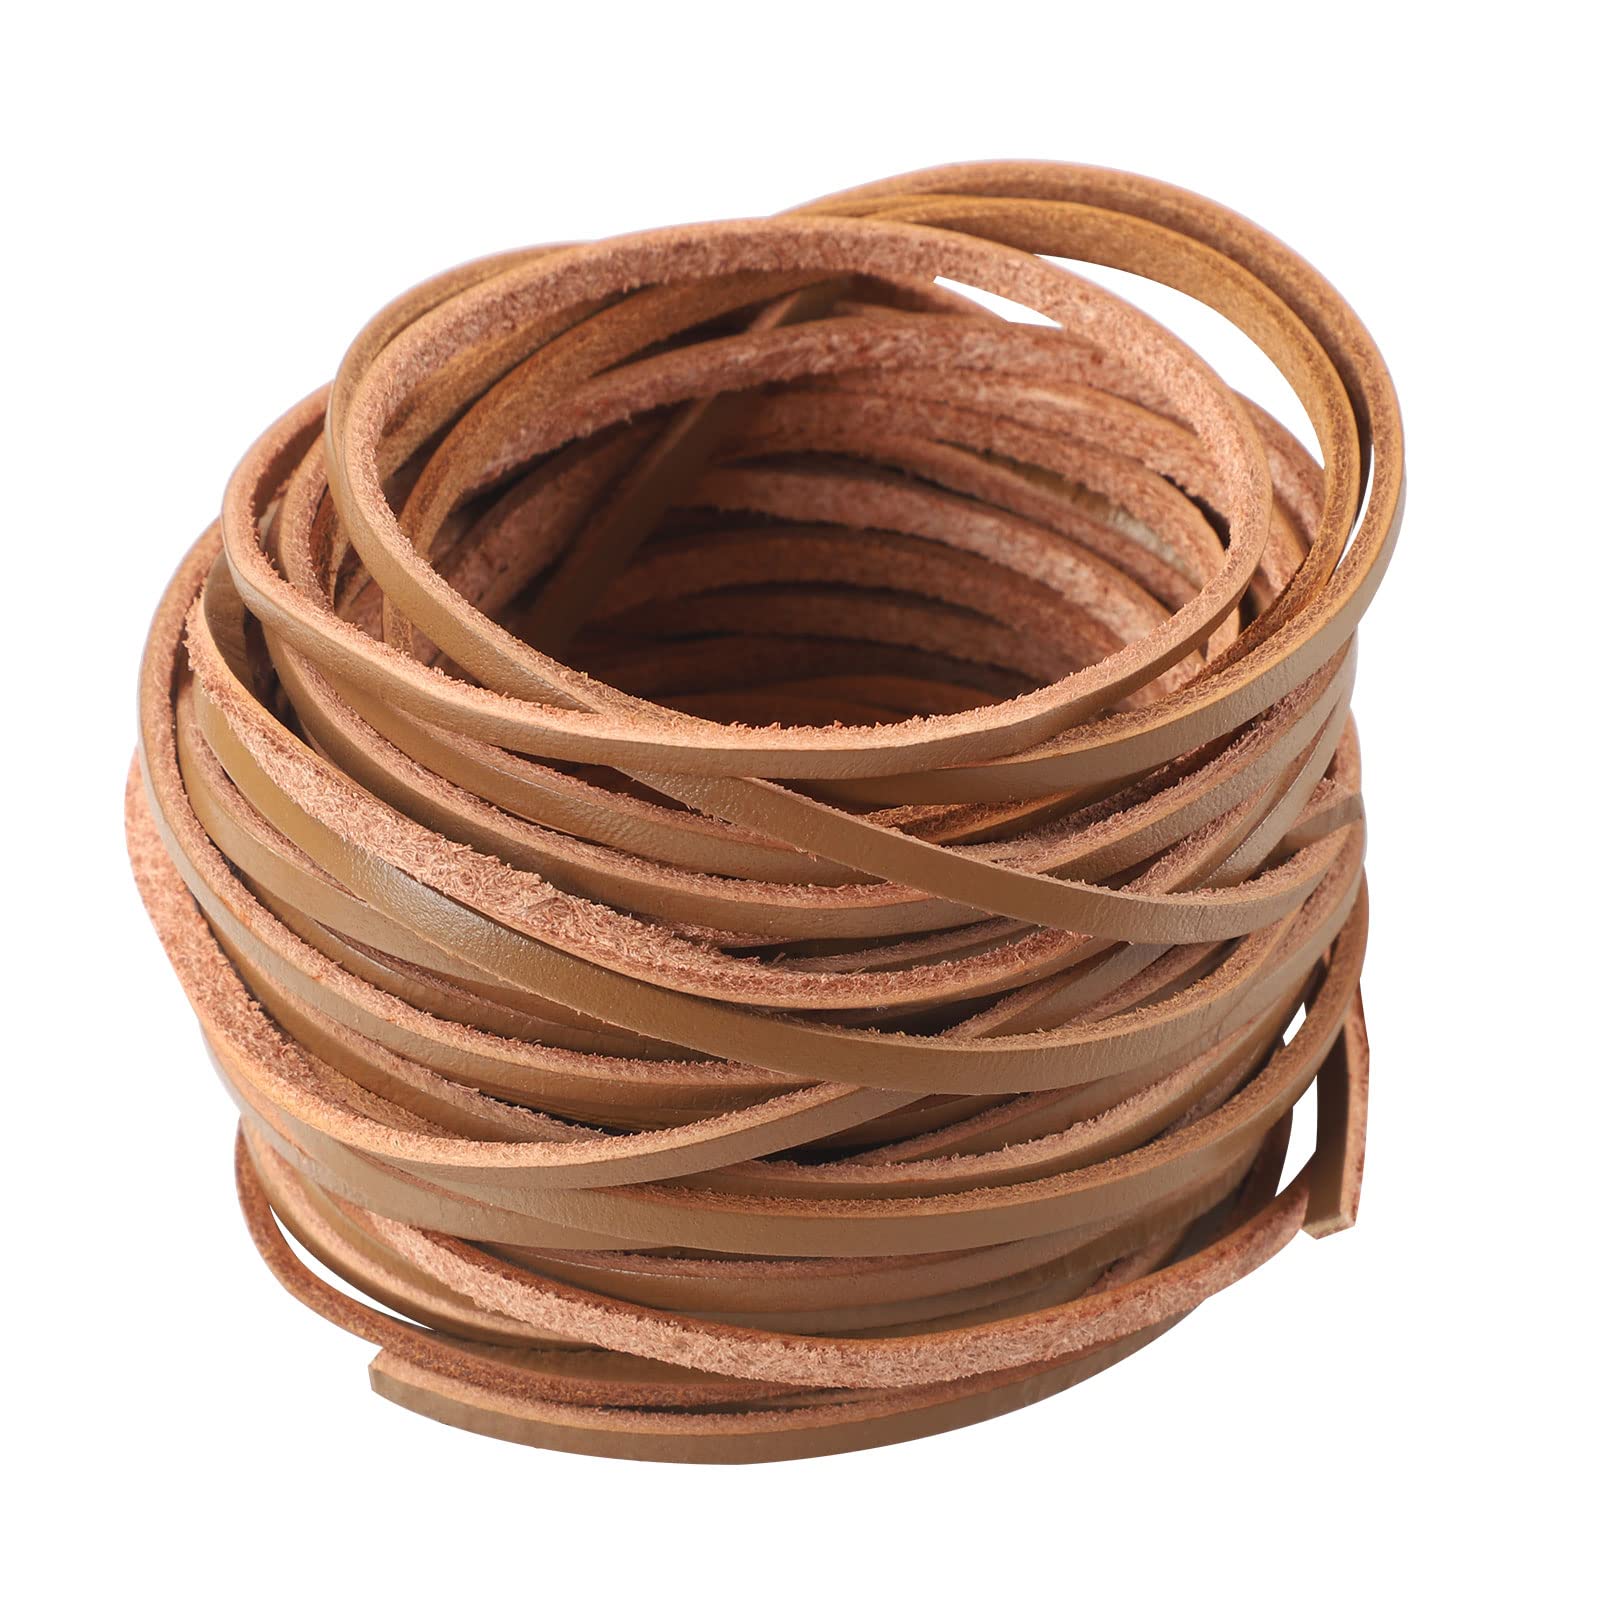 Picheng 3mm Flat Genuine Leather Cord, 5Yards Strip Cord Braiding String  Very Suitable for Jewelry Making